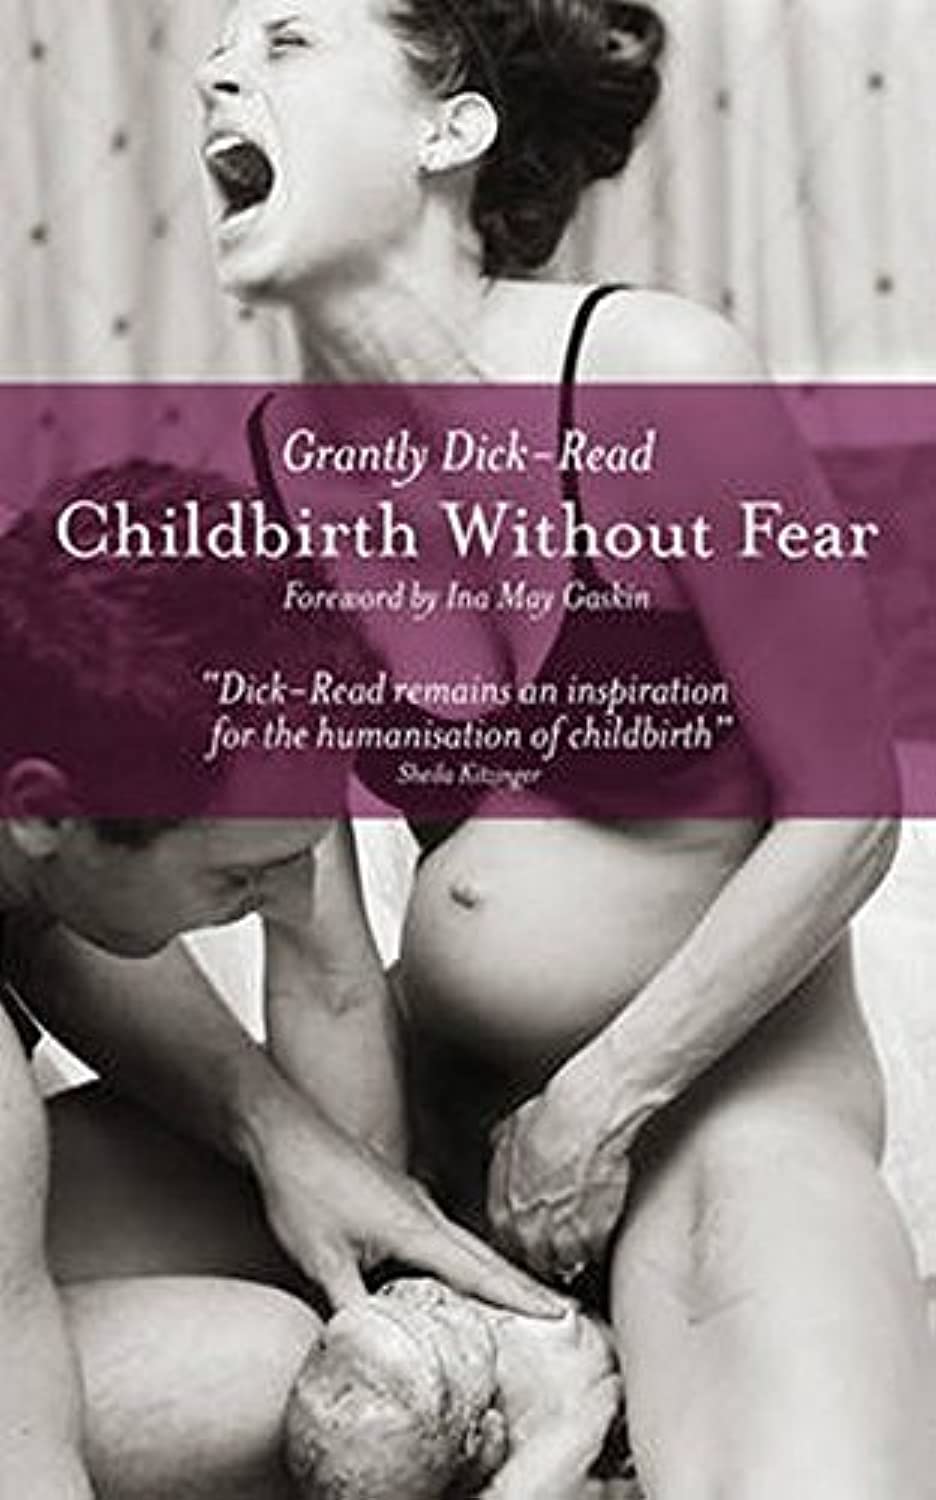 Childbirth without Fear: The Principles and Practice of Natural Childbirth